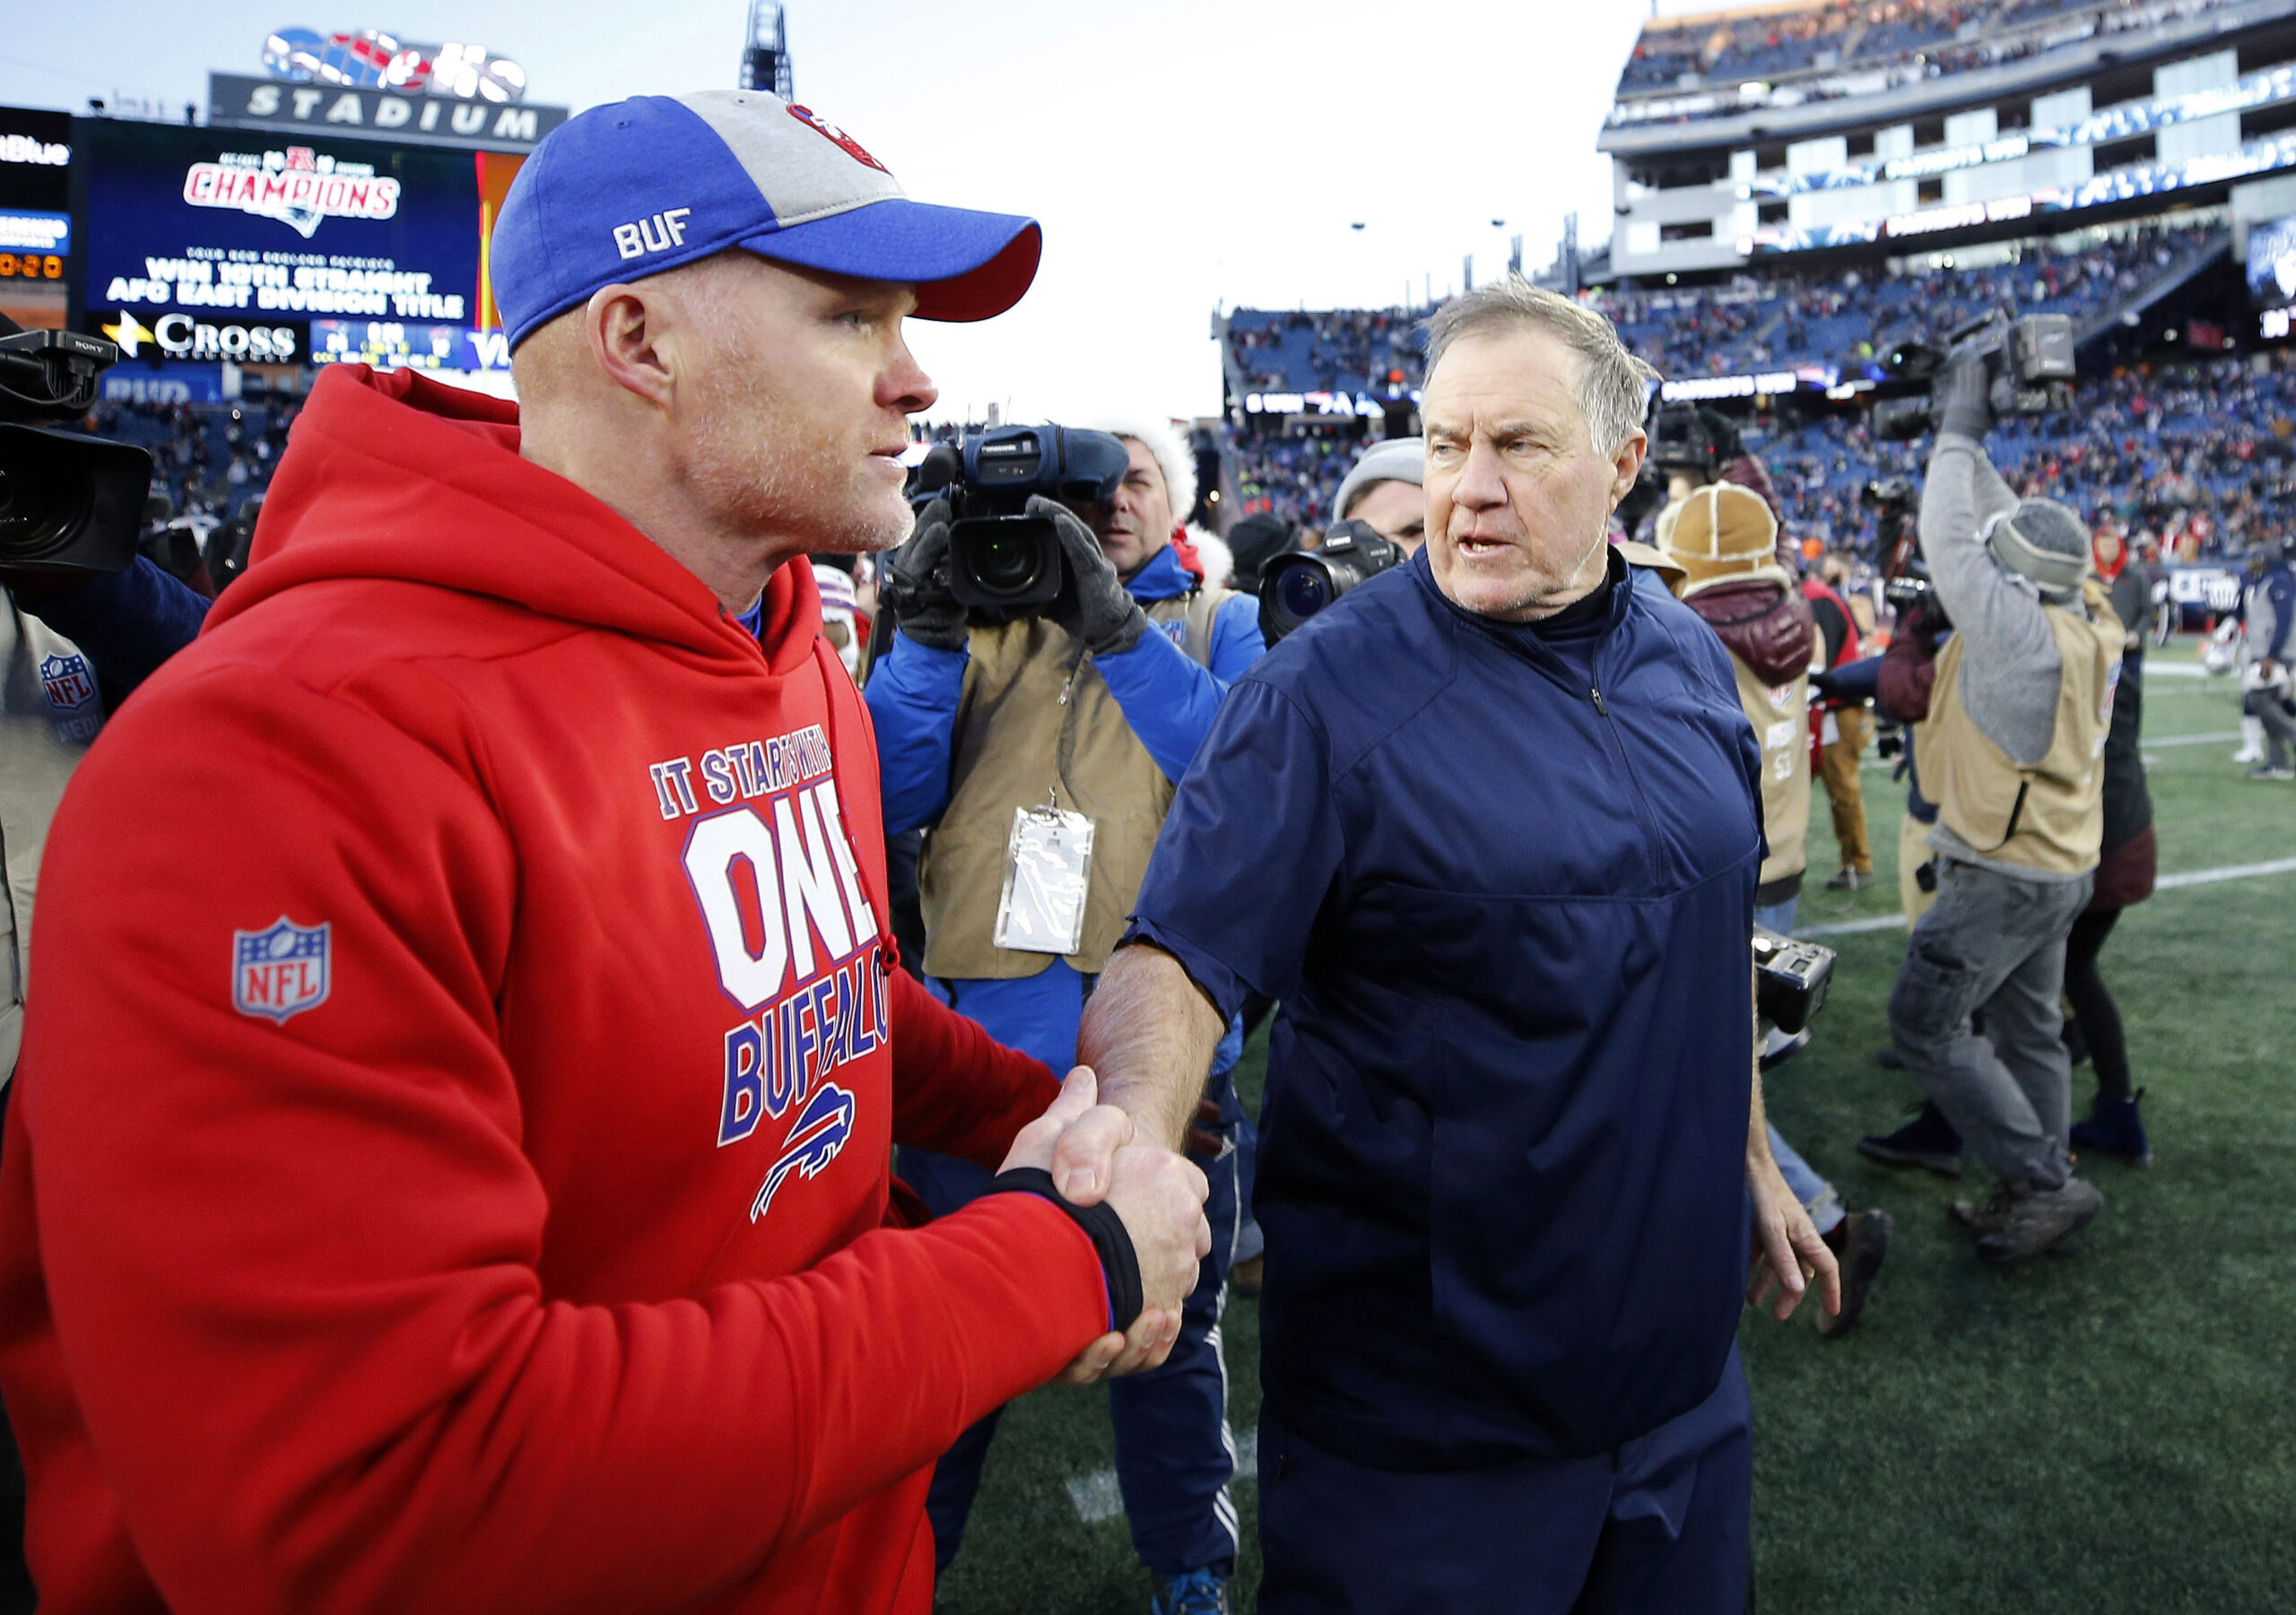 Bill Belichick and Sean McDermott shake hands after the game